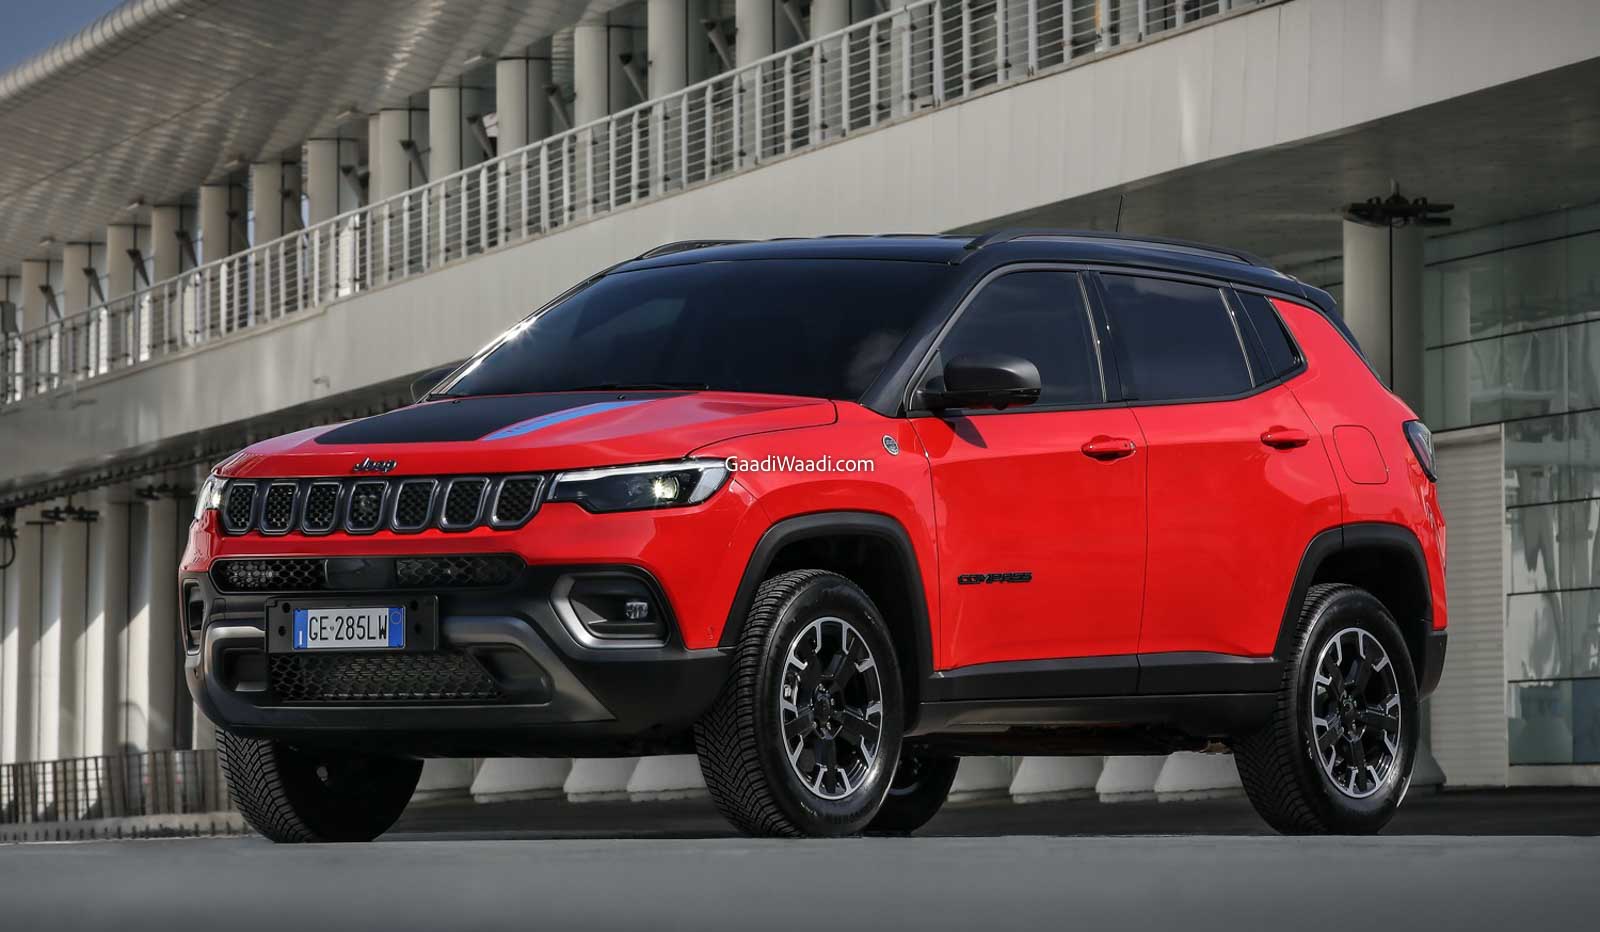 Up Close With the 2022 Jeep Compass: Charting an Upmarket Course With New  Interior, Technology